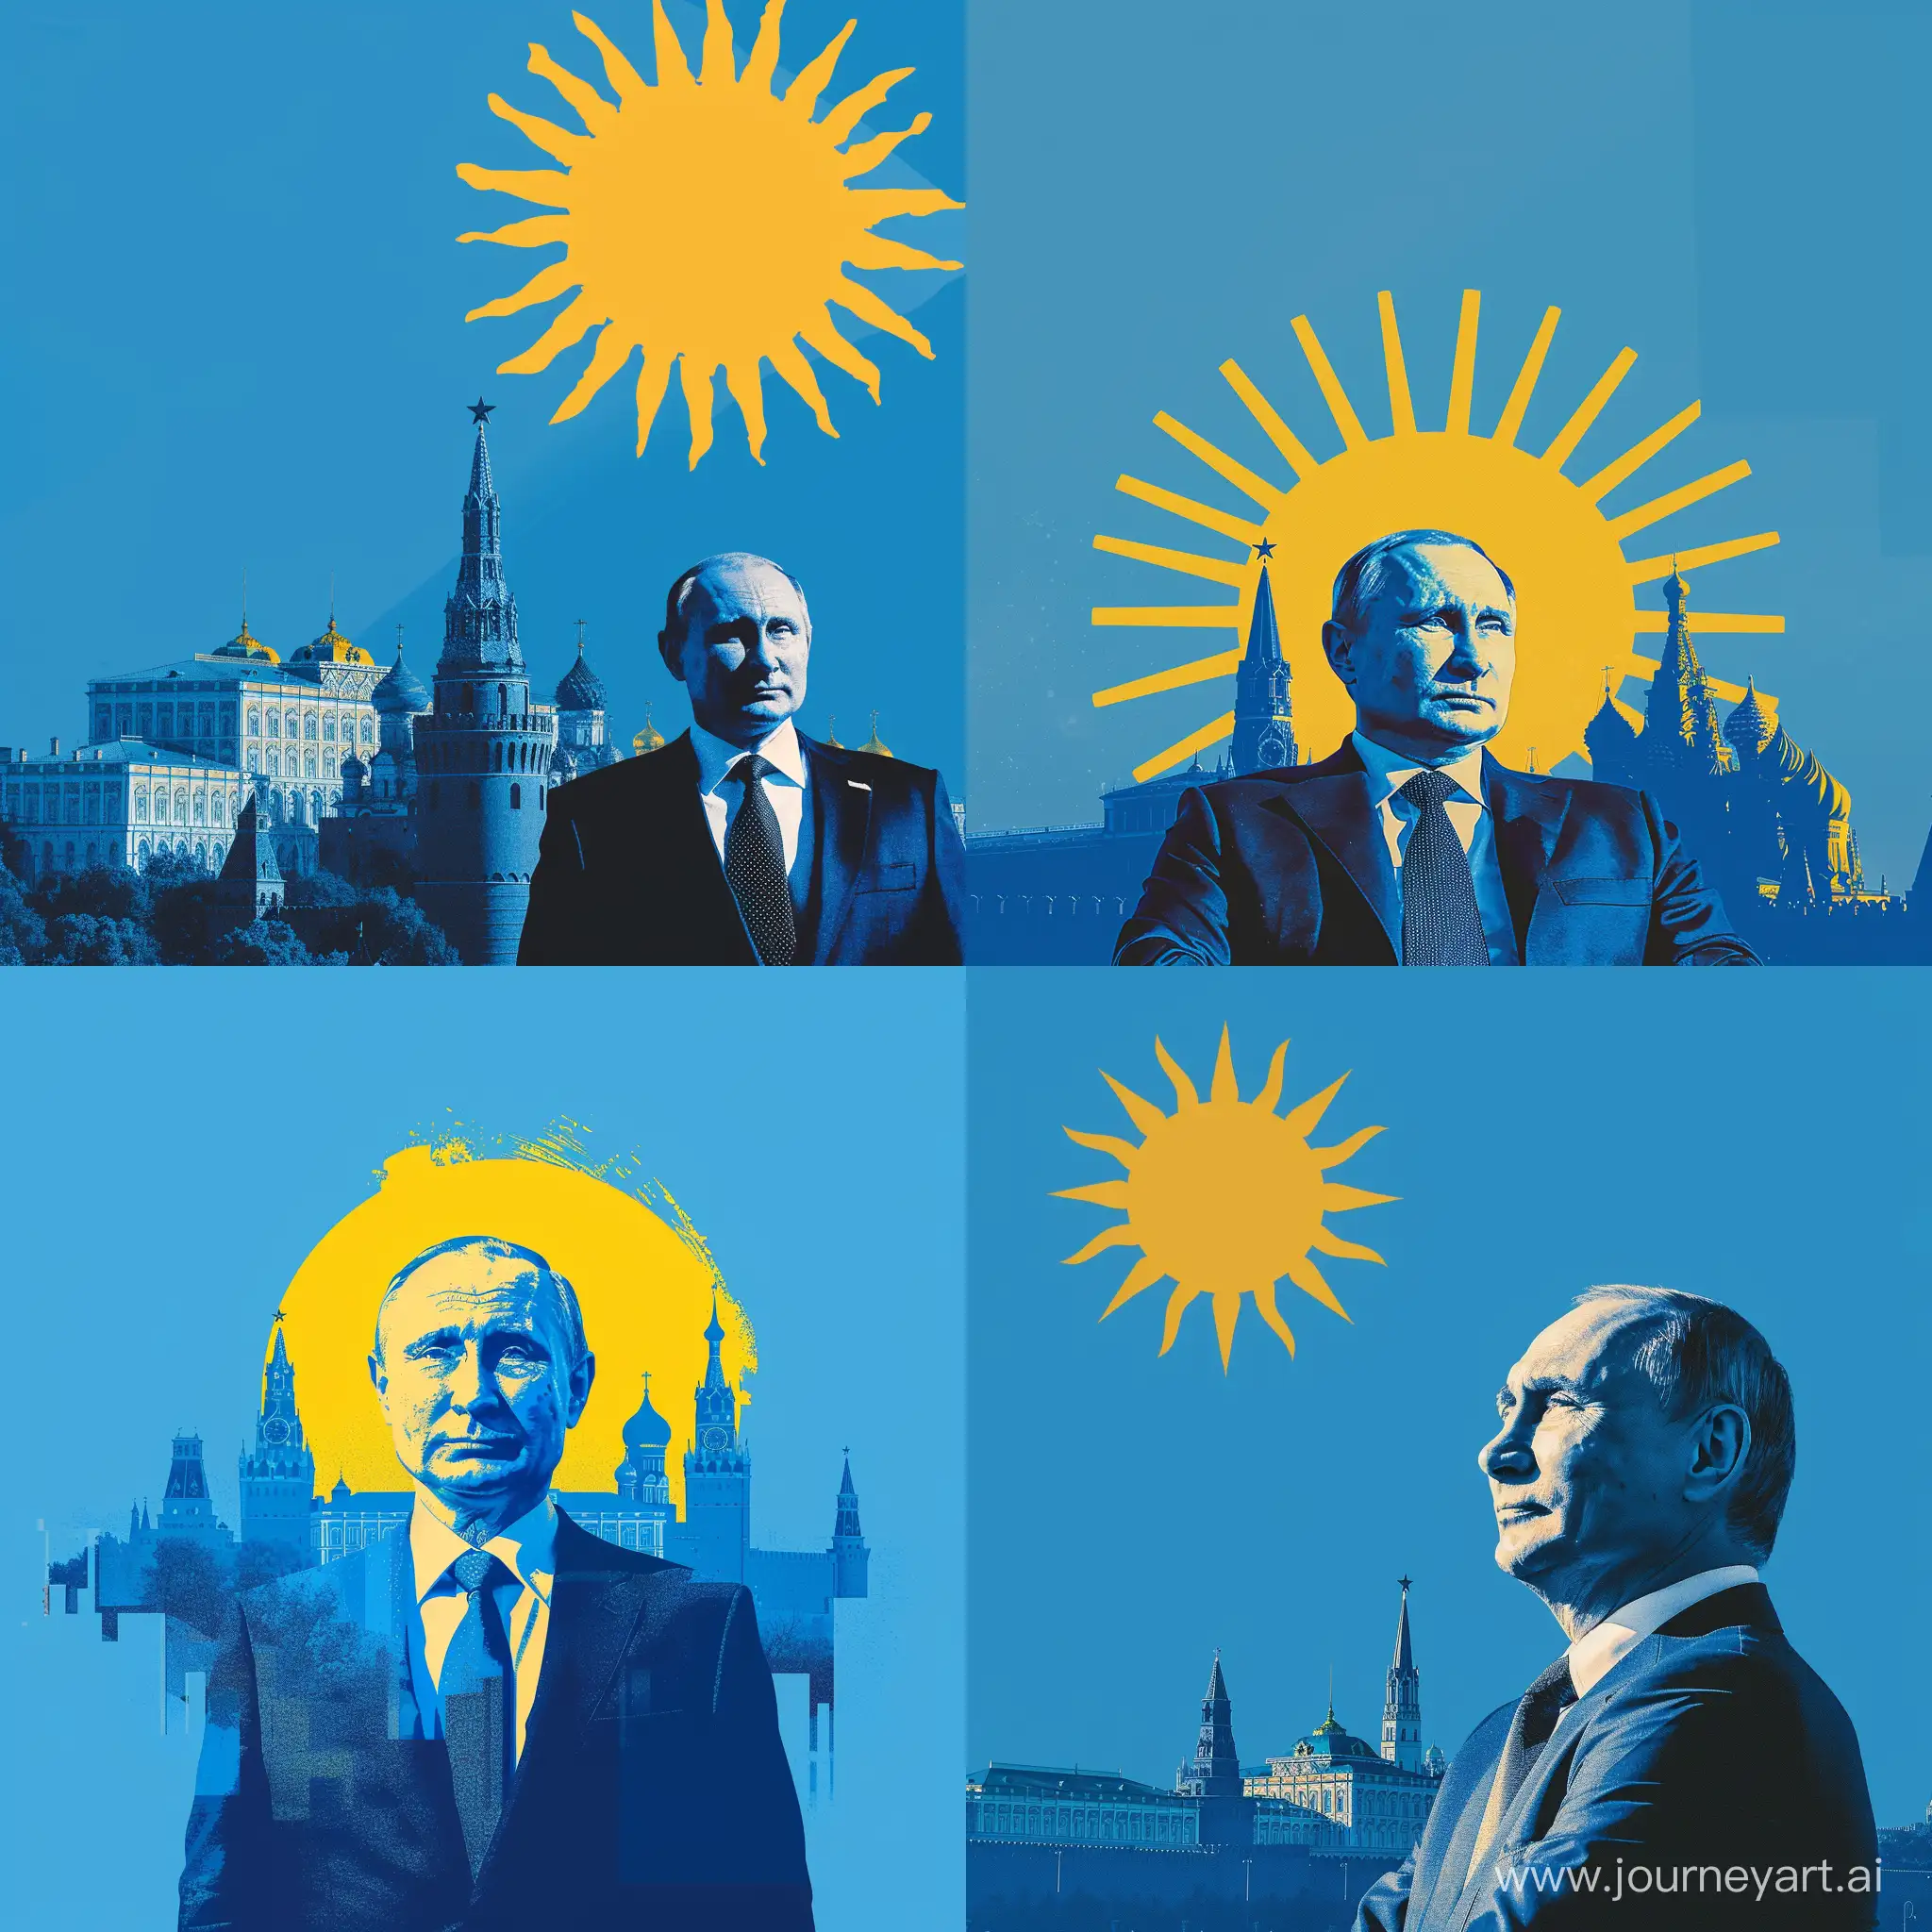 A picture of Putin with the Kremlin and Moscow behind him in blue and the sun yellow